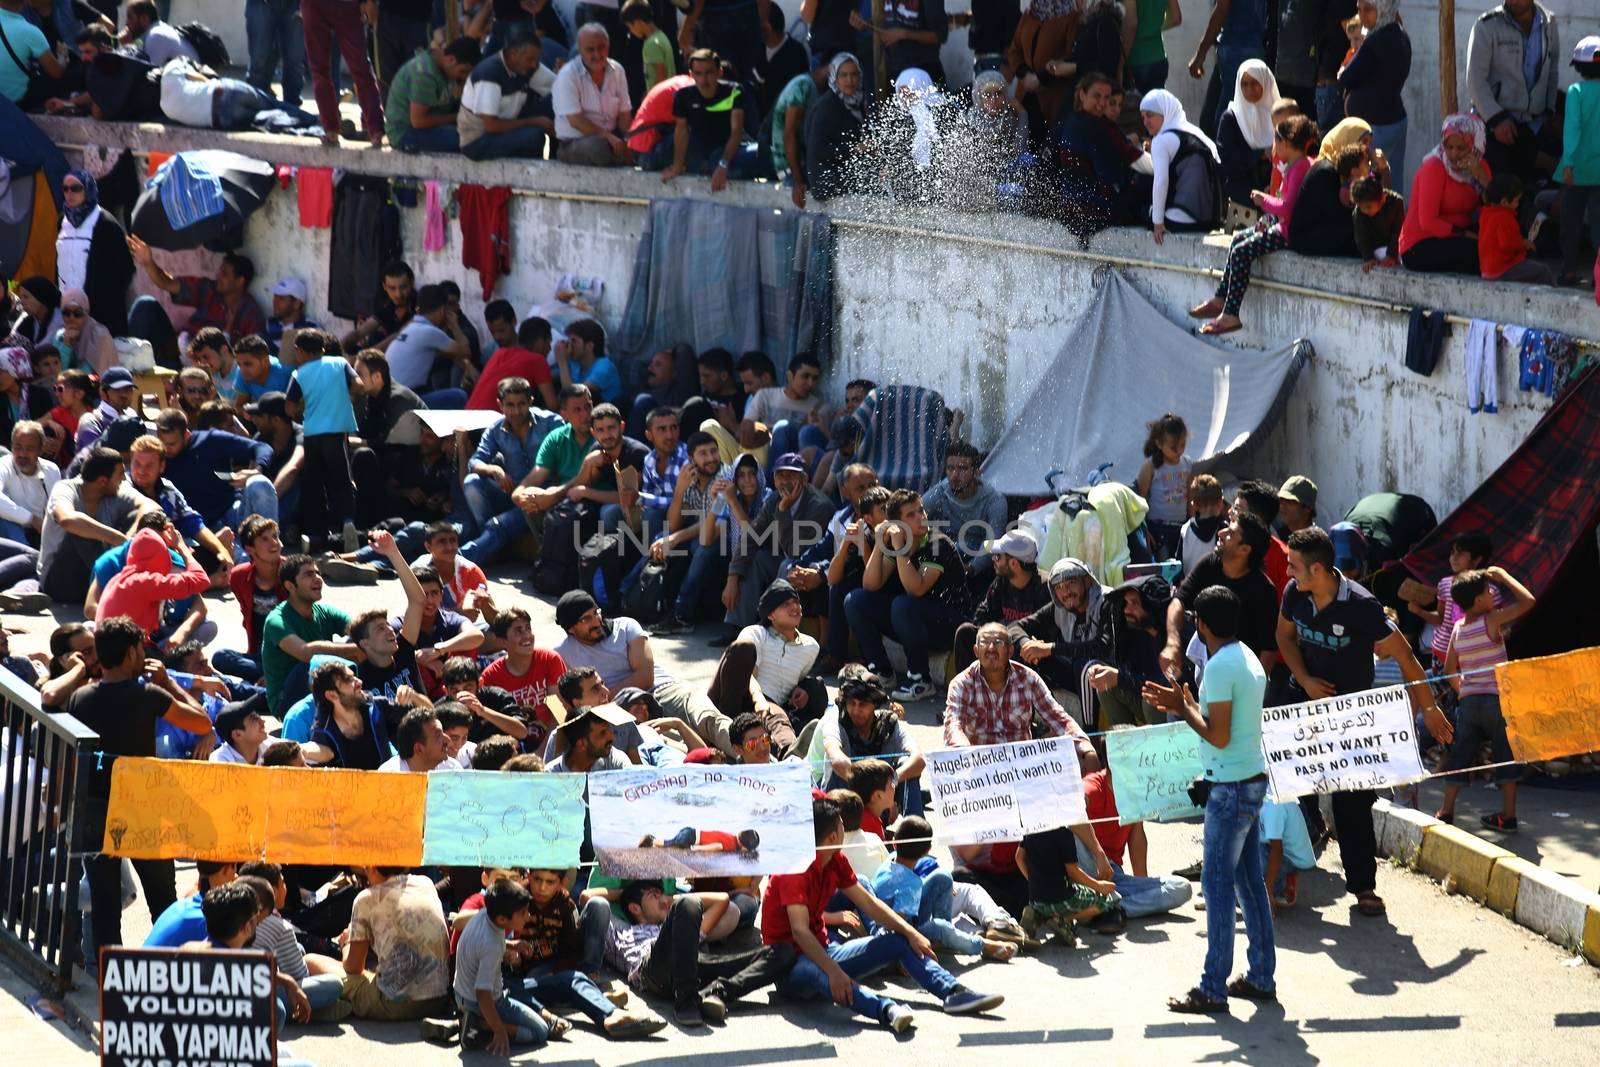 TURKEY, Istanbul: Refugees sit and wait near the Esenler Bus Terminal in Istanbul, Turkey on September 19, 2015 after the government ordered that bus tickets not be sold to them. They are waiting for the government to reverse the decision so they can travel to the Turkish border town of Edirne to continue their journey into Europe